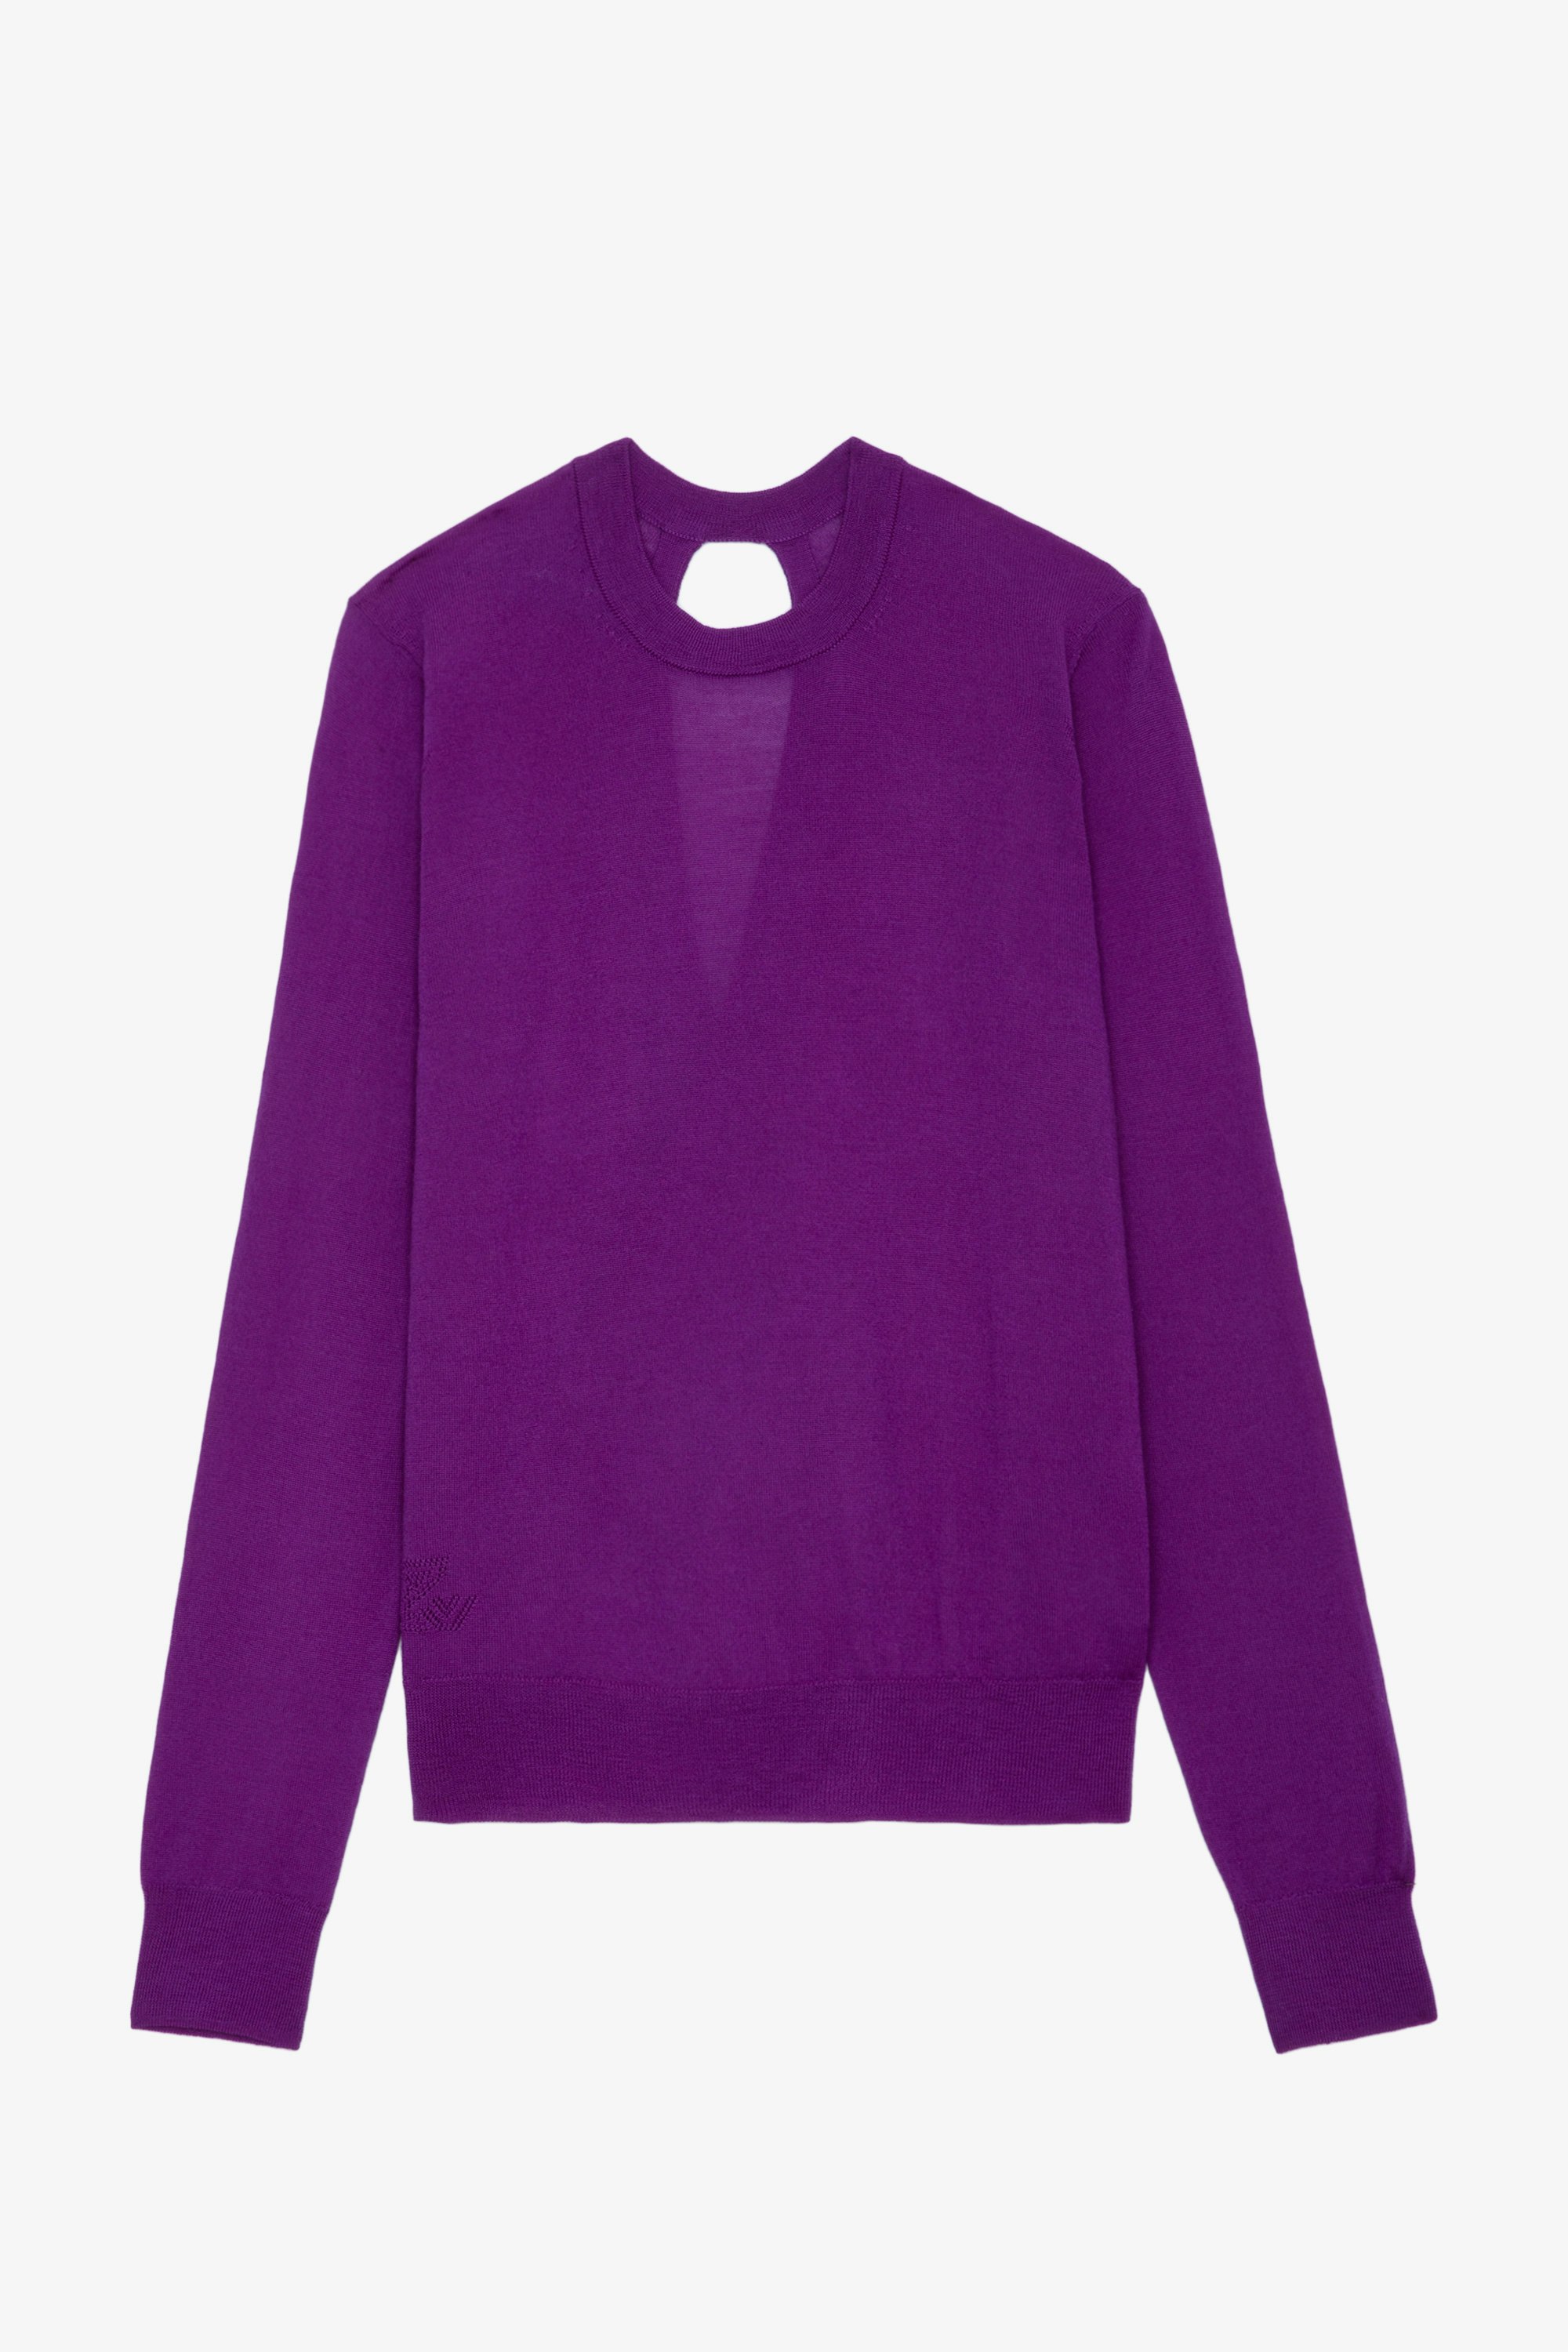 Emma ニット - Purple merino wool round-neck jumper with long sleeves and open crossover back.